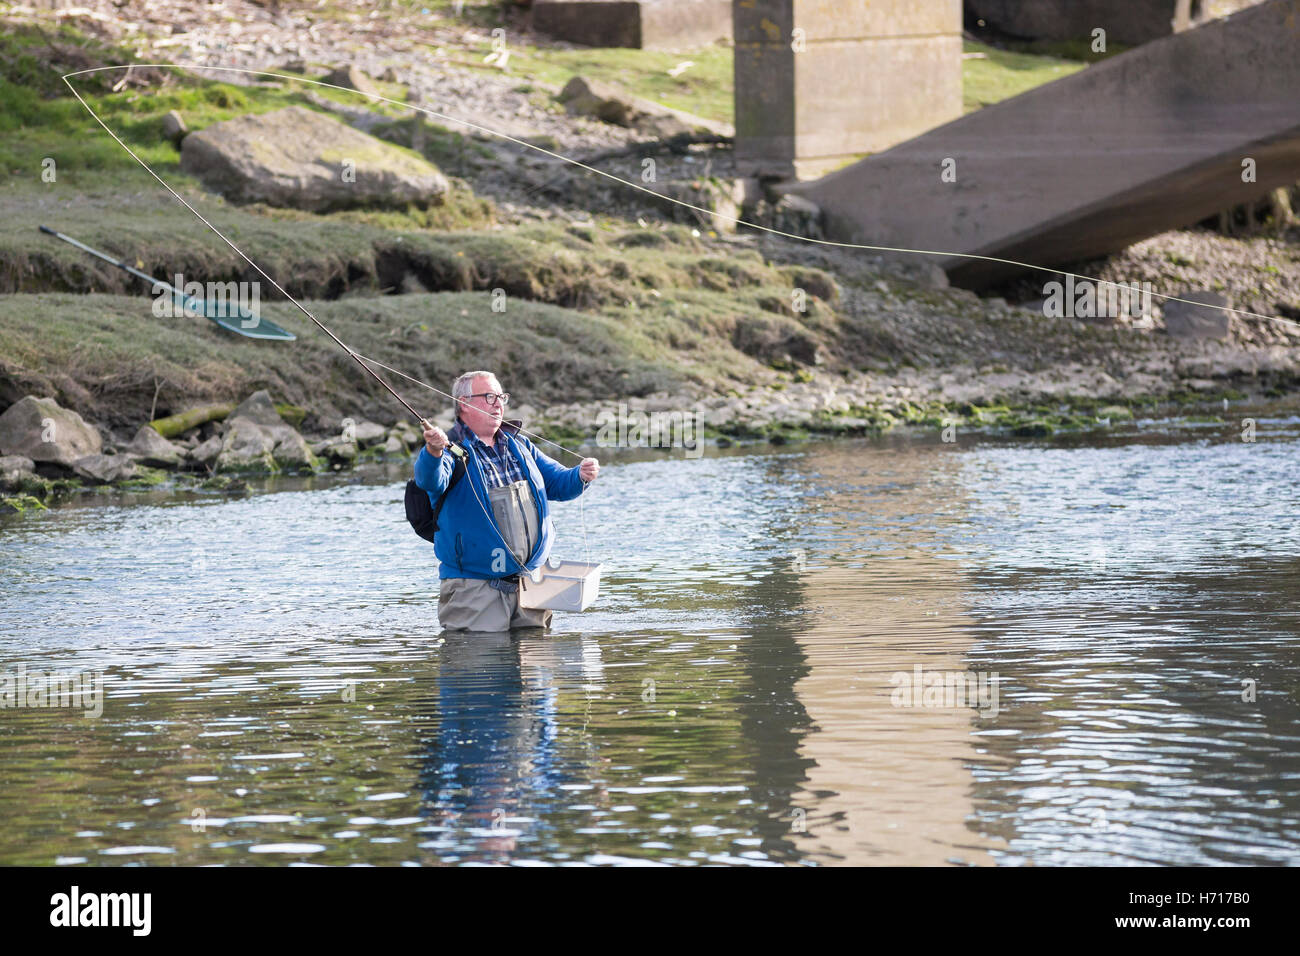 fly fisherman casting on river Stock Photo